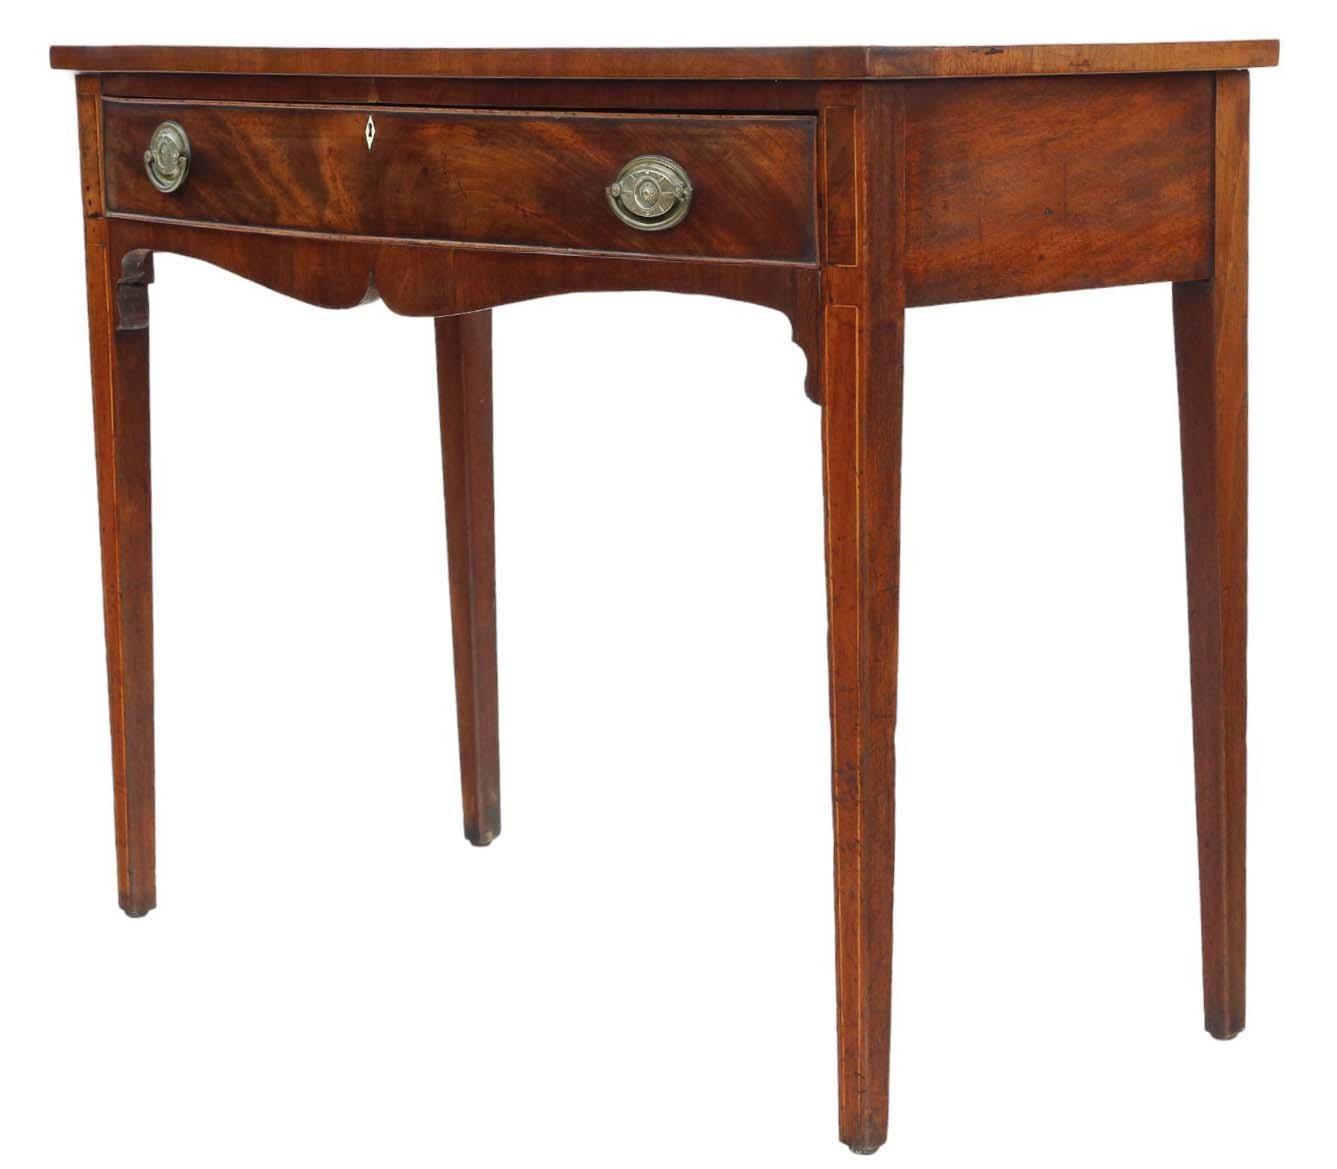 Antique 19th Century Bow Front Inlaid Mahogany Desk Writing Side Dressing Table In Good Condition For Sale In Wisbech, Cambridgeshire